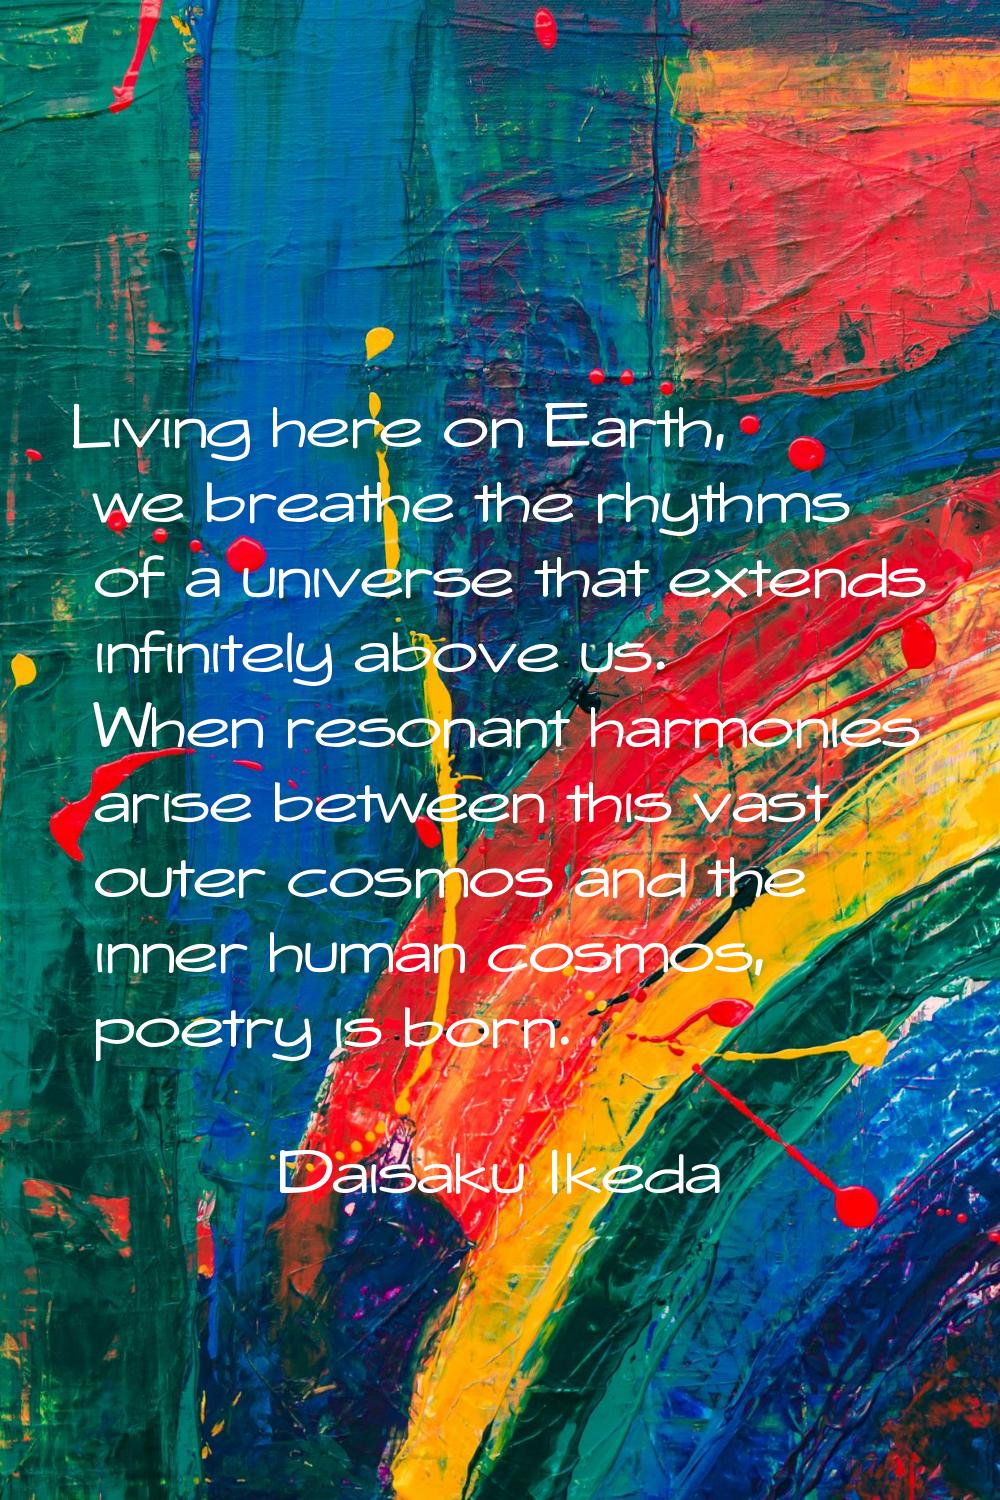 Living here on Earth, we breathe the rhythms of a universe that extends infinitely above us. When r